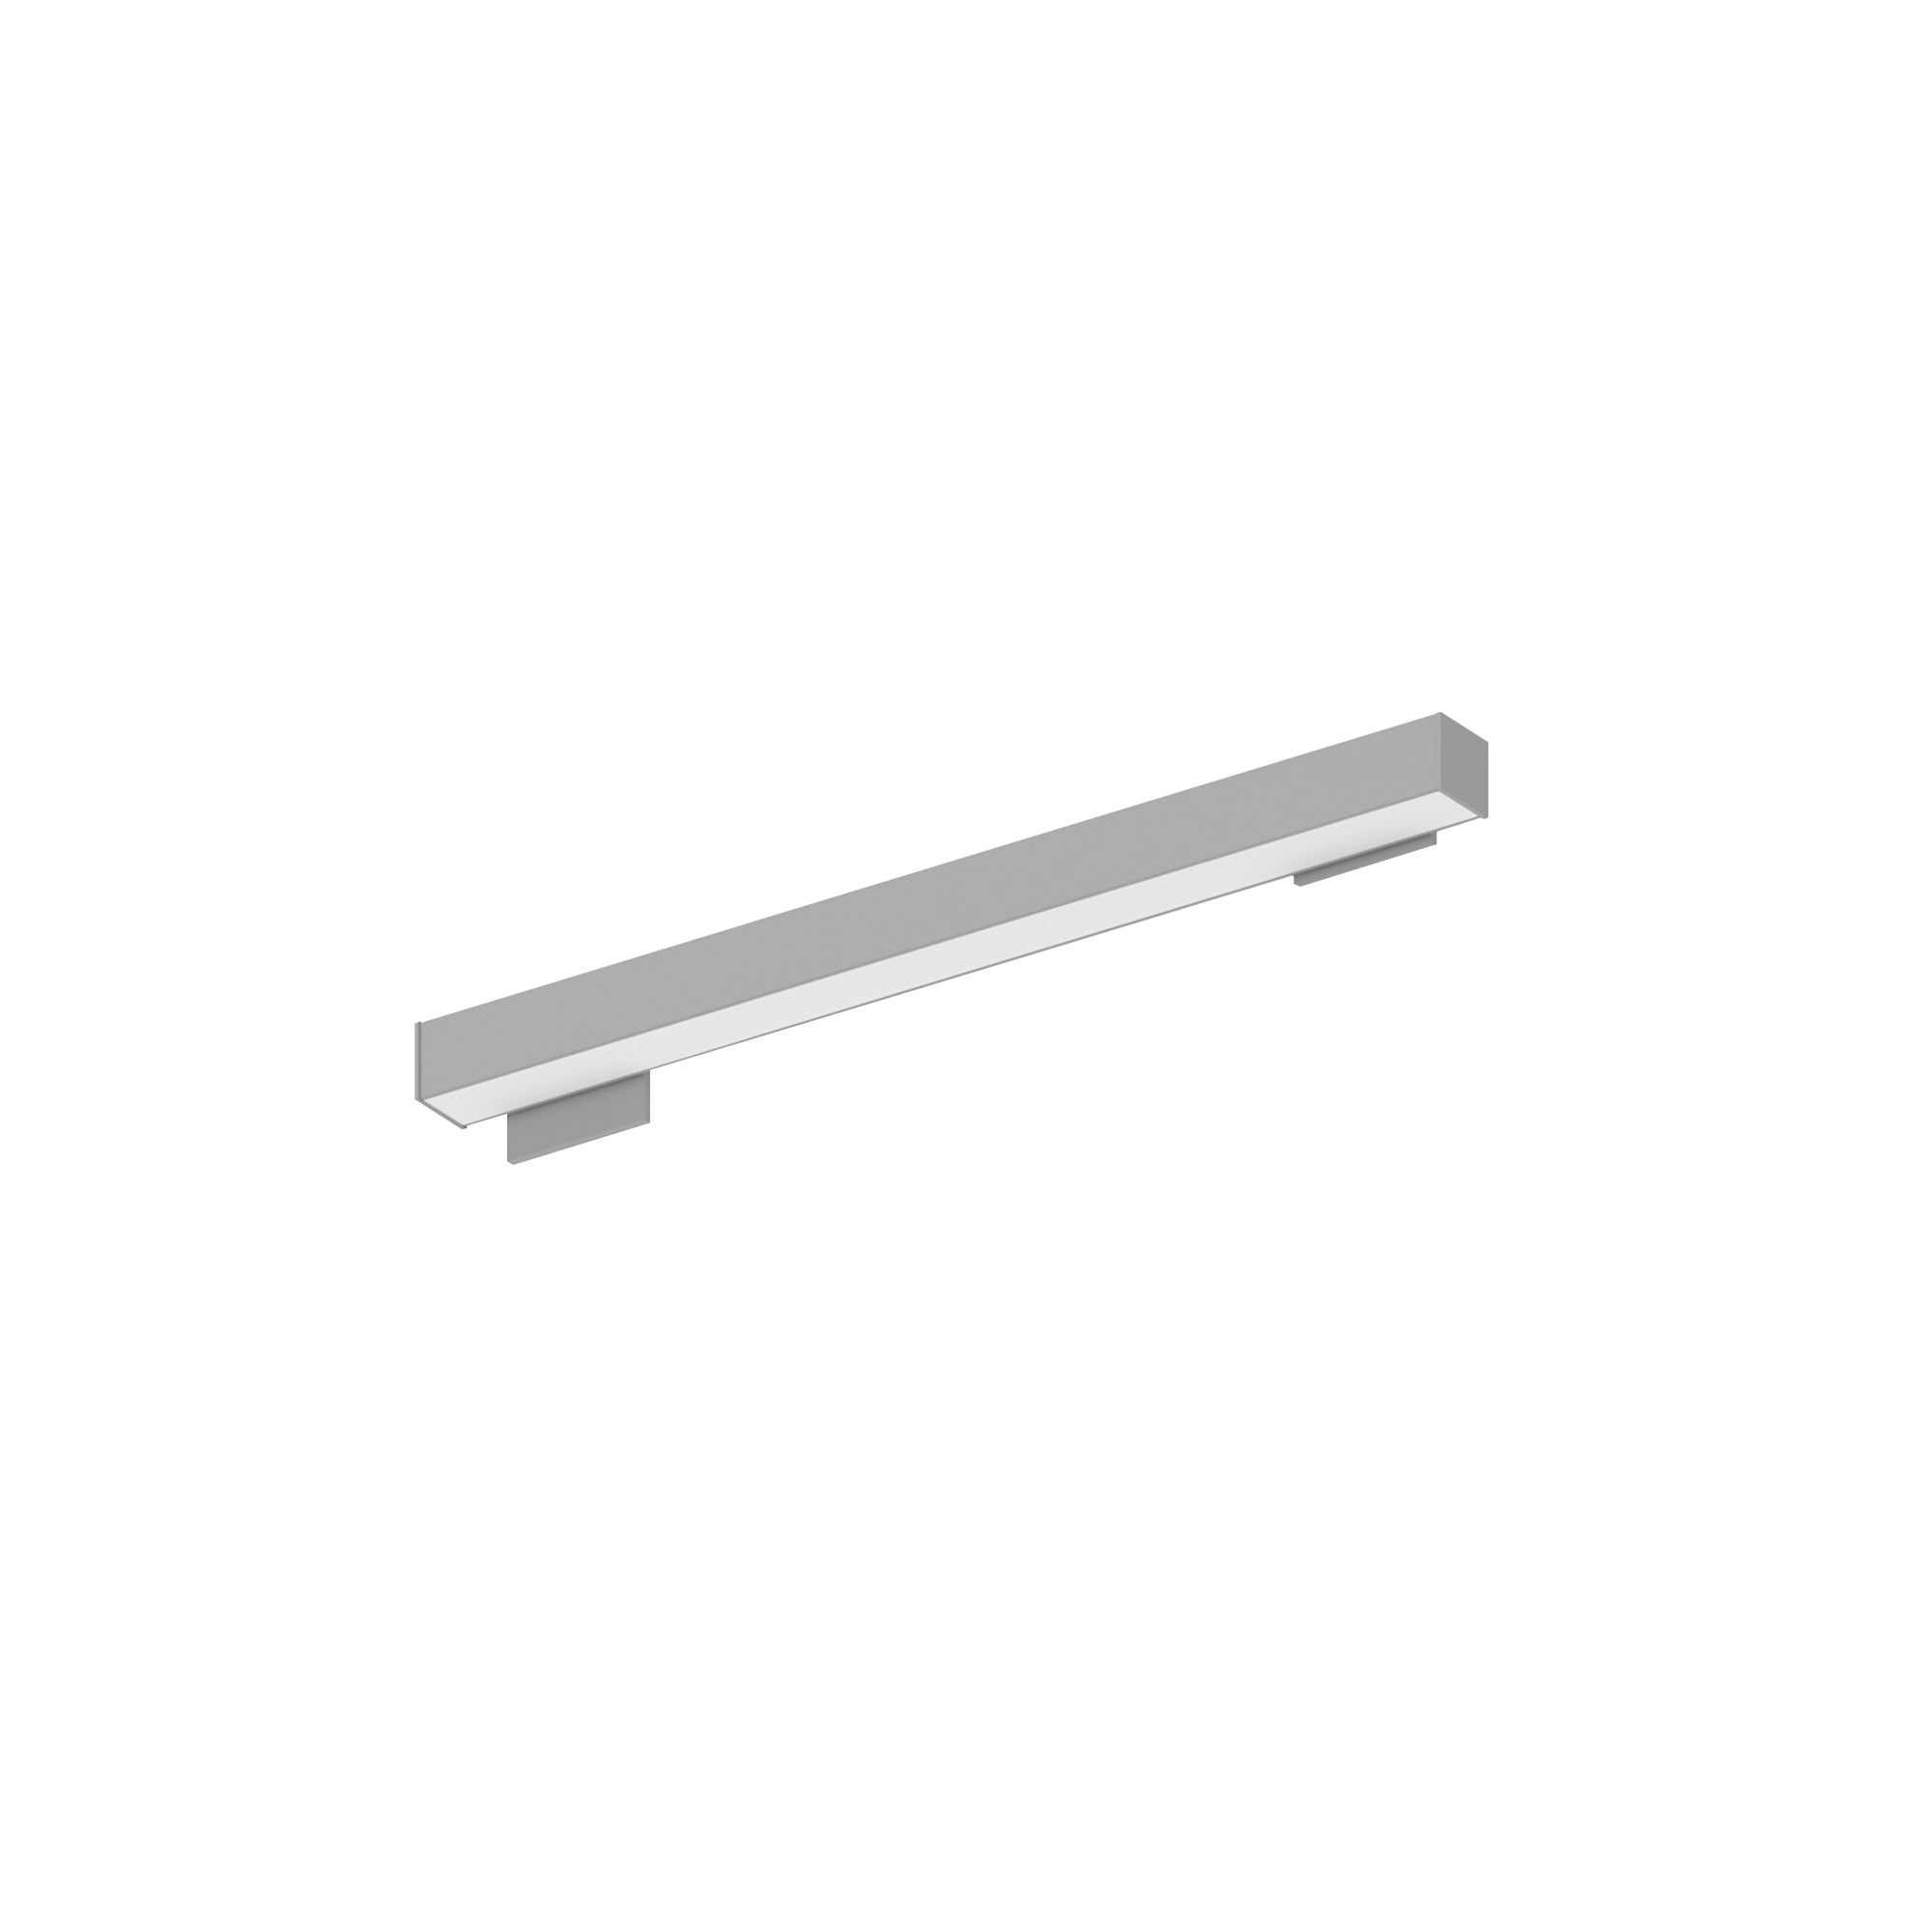 Nora Lighting NWLIN-21035A/L4-R2P - Linear - 2' L-Line LED Wall Mount Linear, 2100lm / 3500K, 4 Inchx4 Inch Left Plate & 2 Inchx4 Inch Right Plate, Right Power Feed, Aluminum Finish